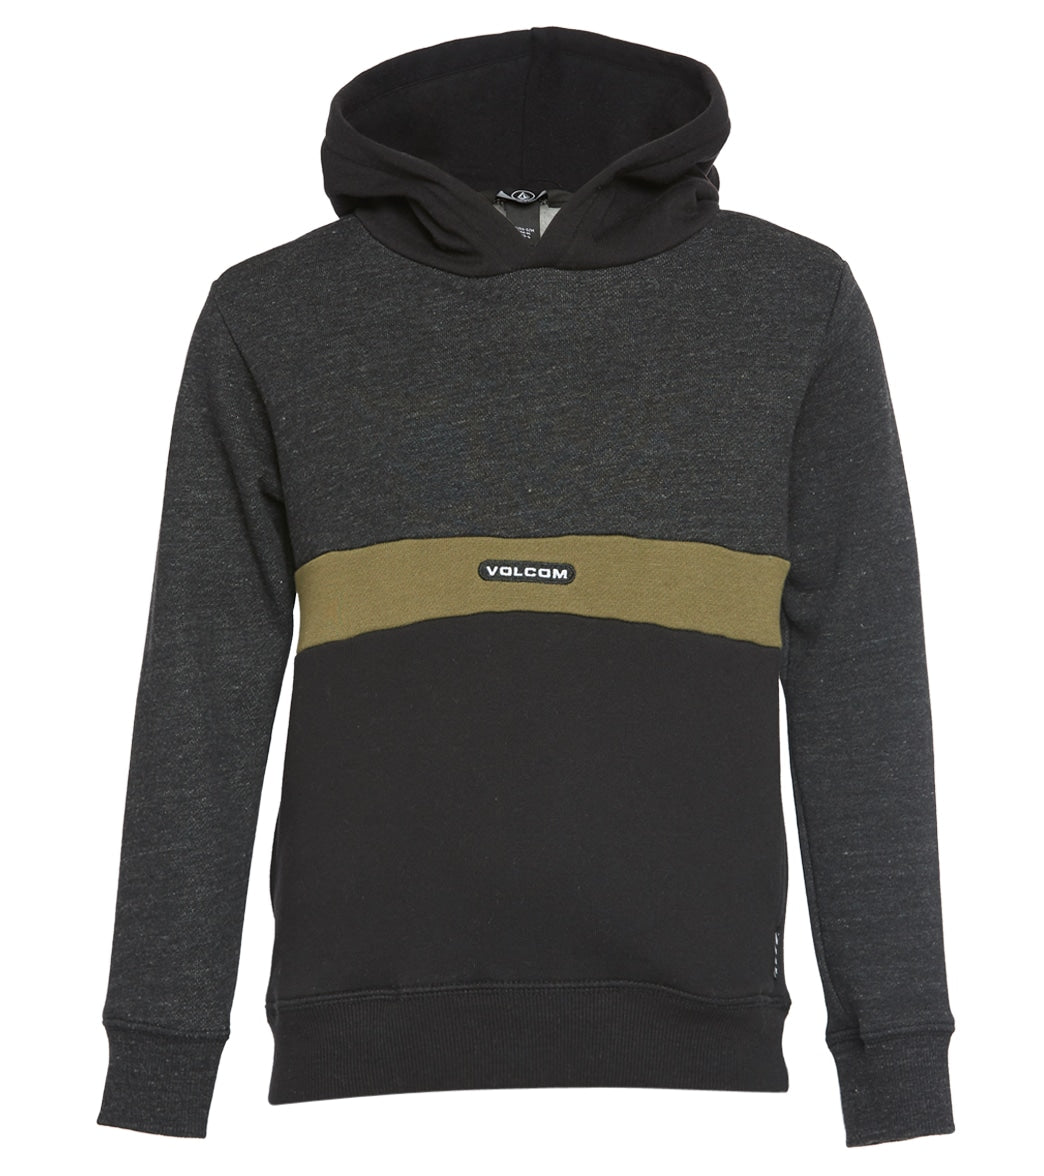 Volcom Boys' Single Stone Division Pullover Hoodie /Little/Big Kid - Sulfur Black 3T Cotton/Polyester - Swimoutlet.com